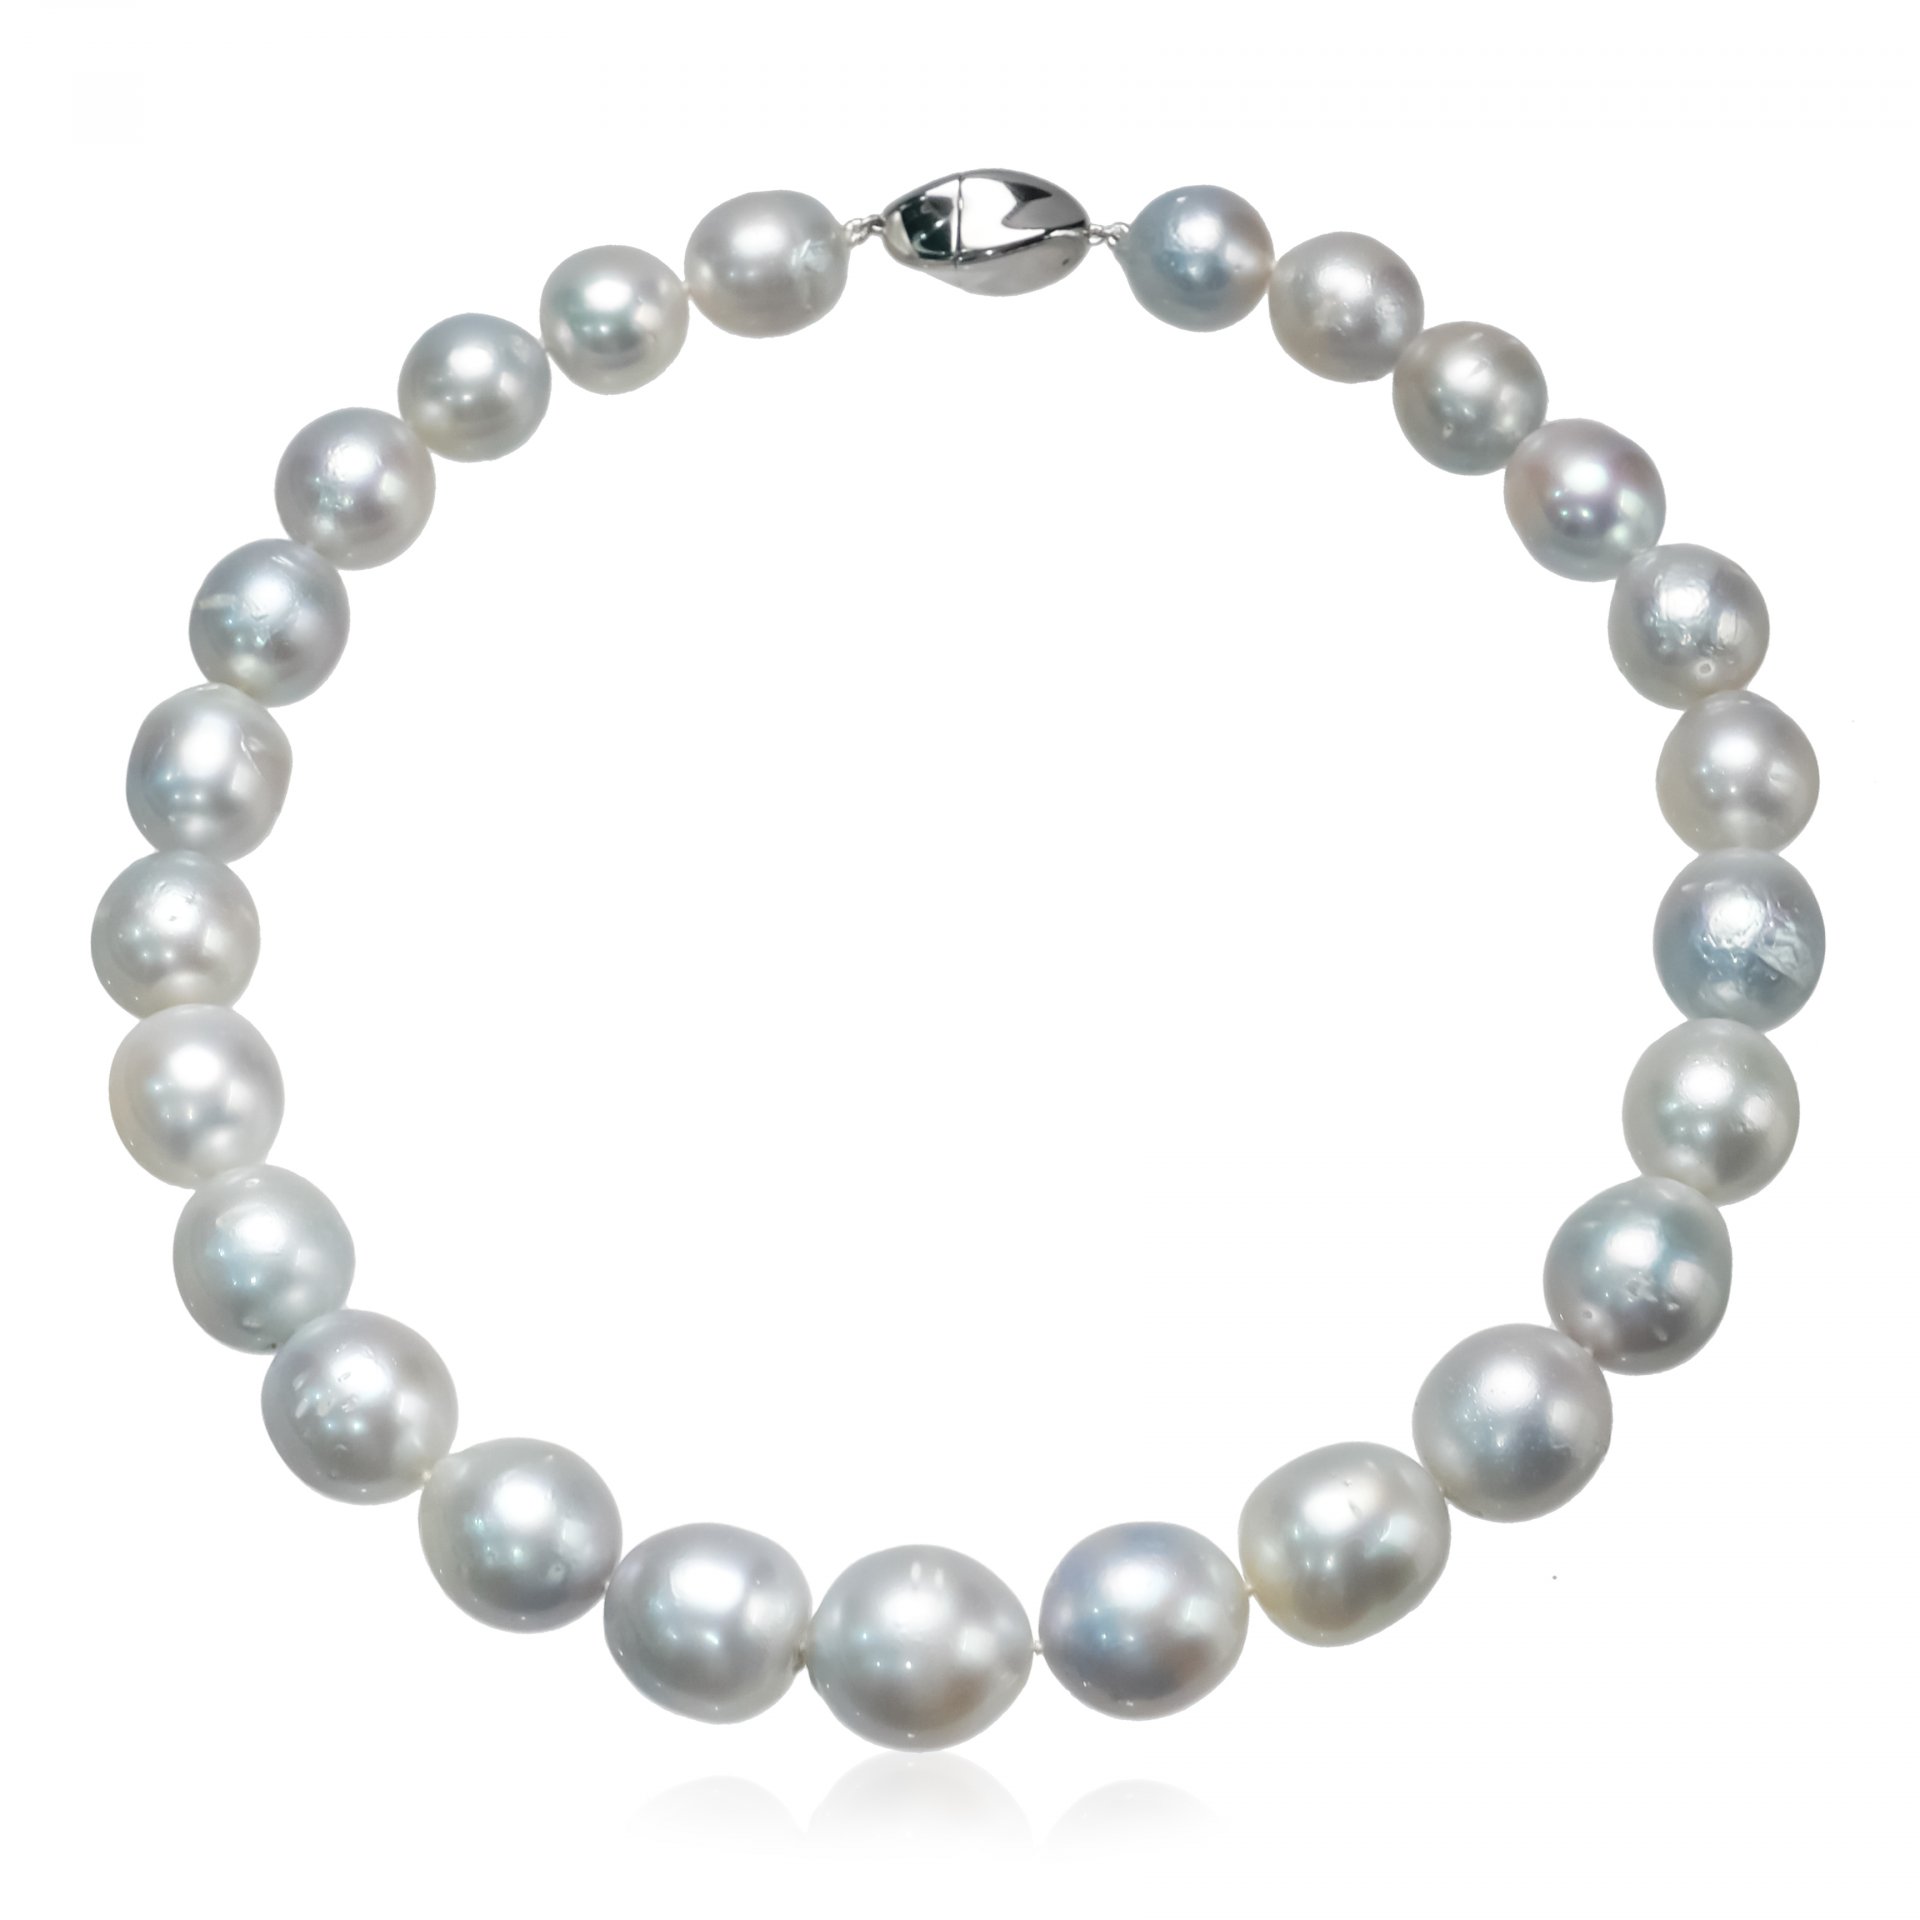 14.09 - 18.26 mm , White South Sea Pearl , Graduated Pearl Necklace